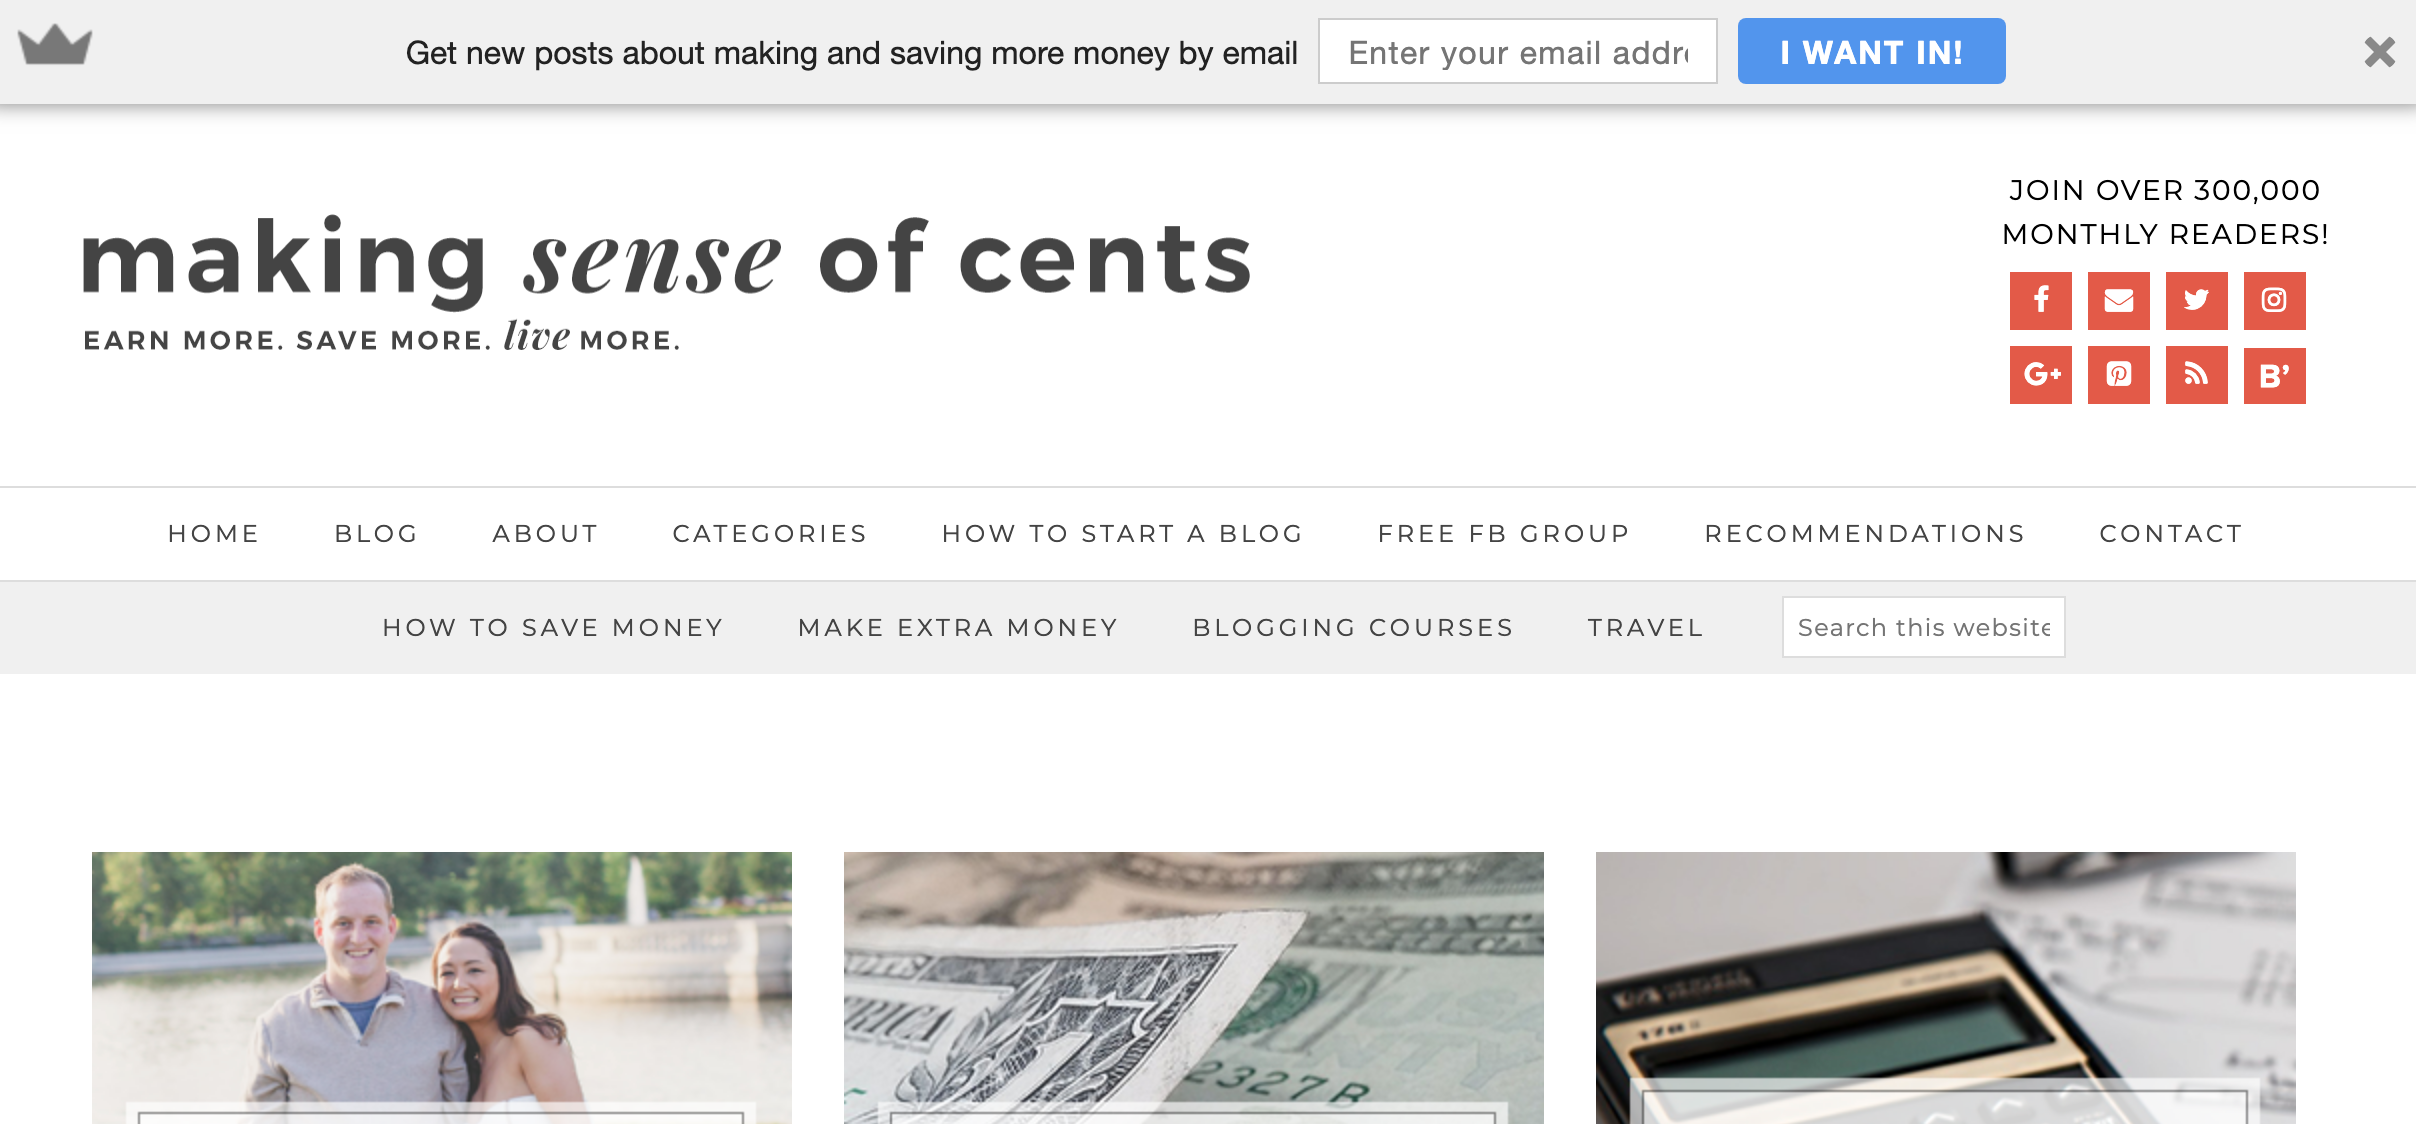 making sense of cents blog with header asking for email address